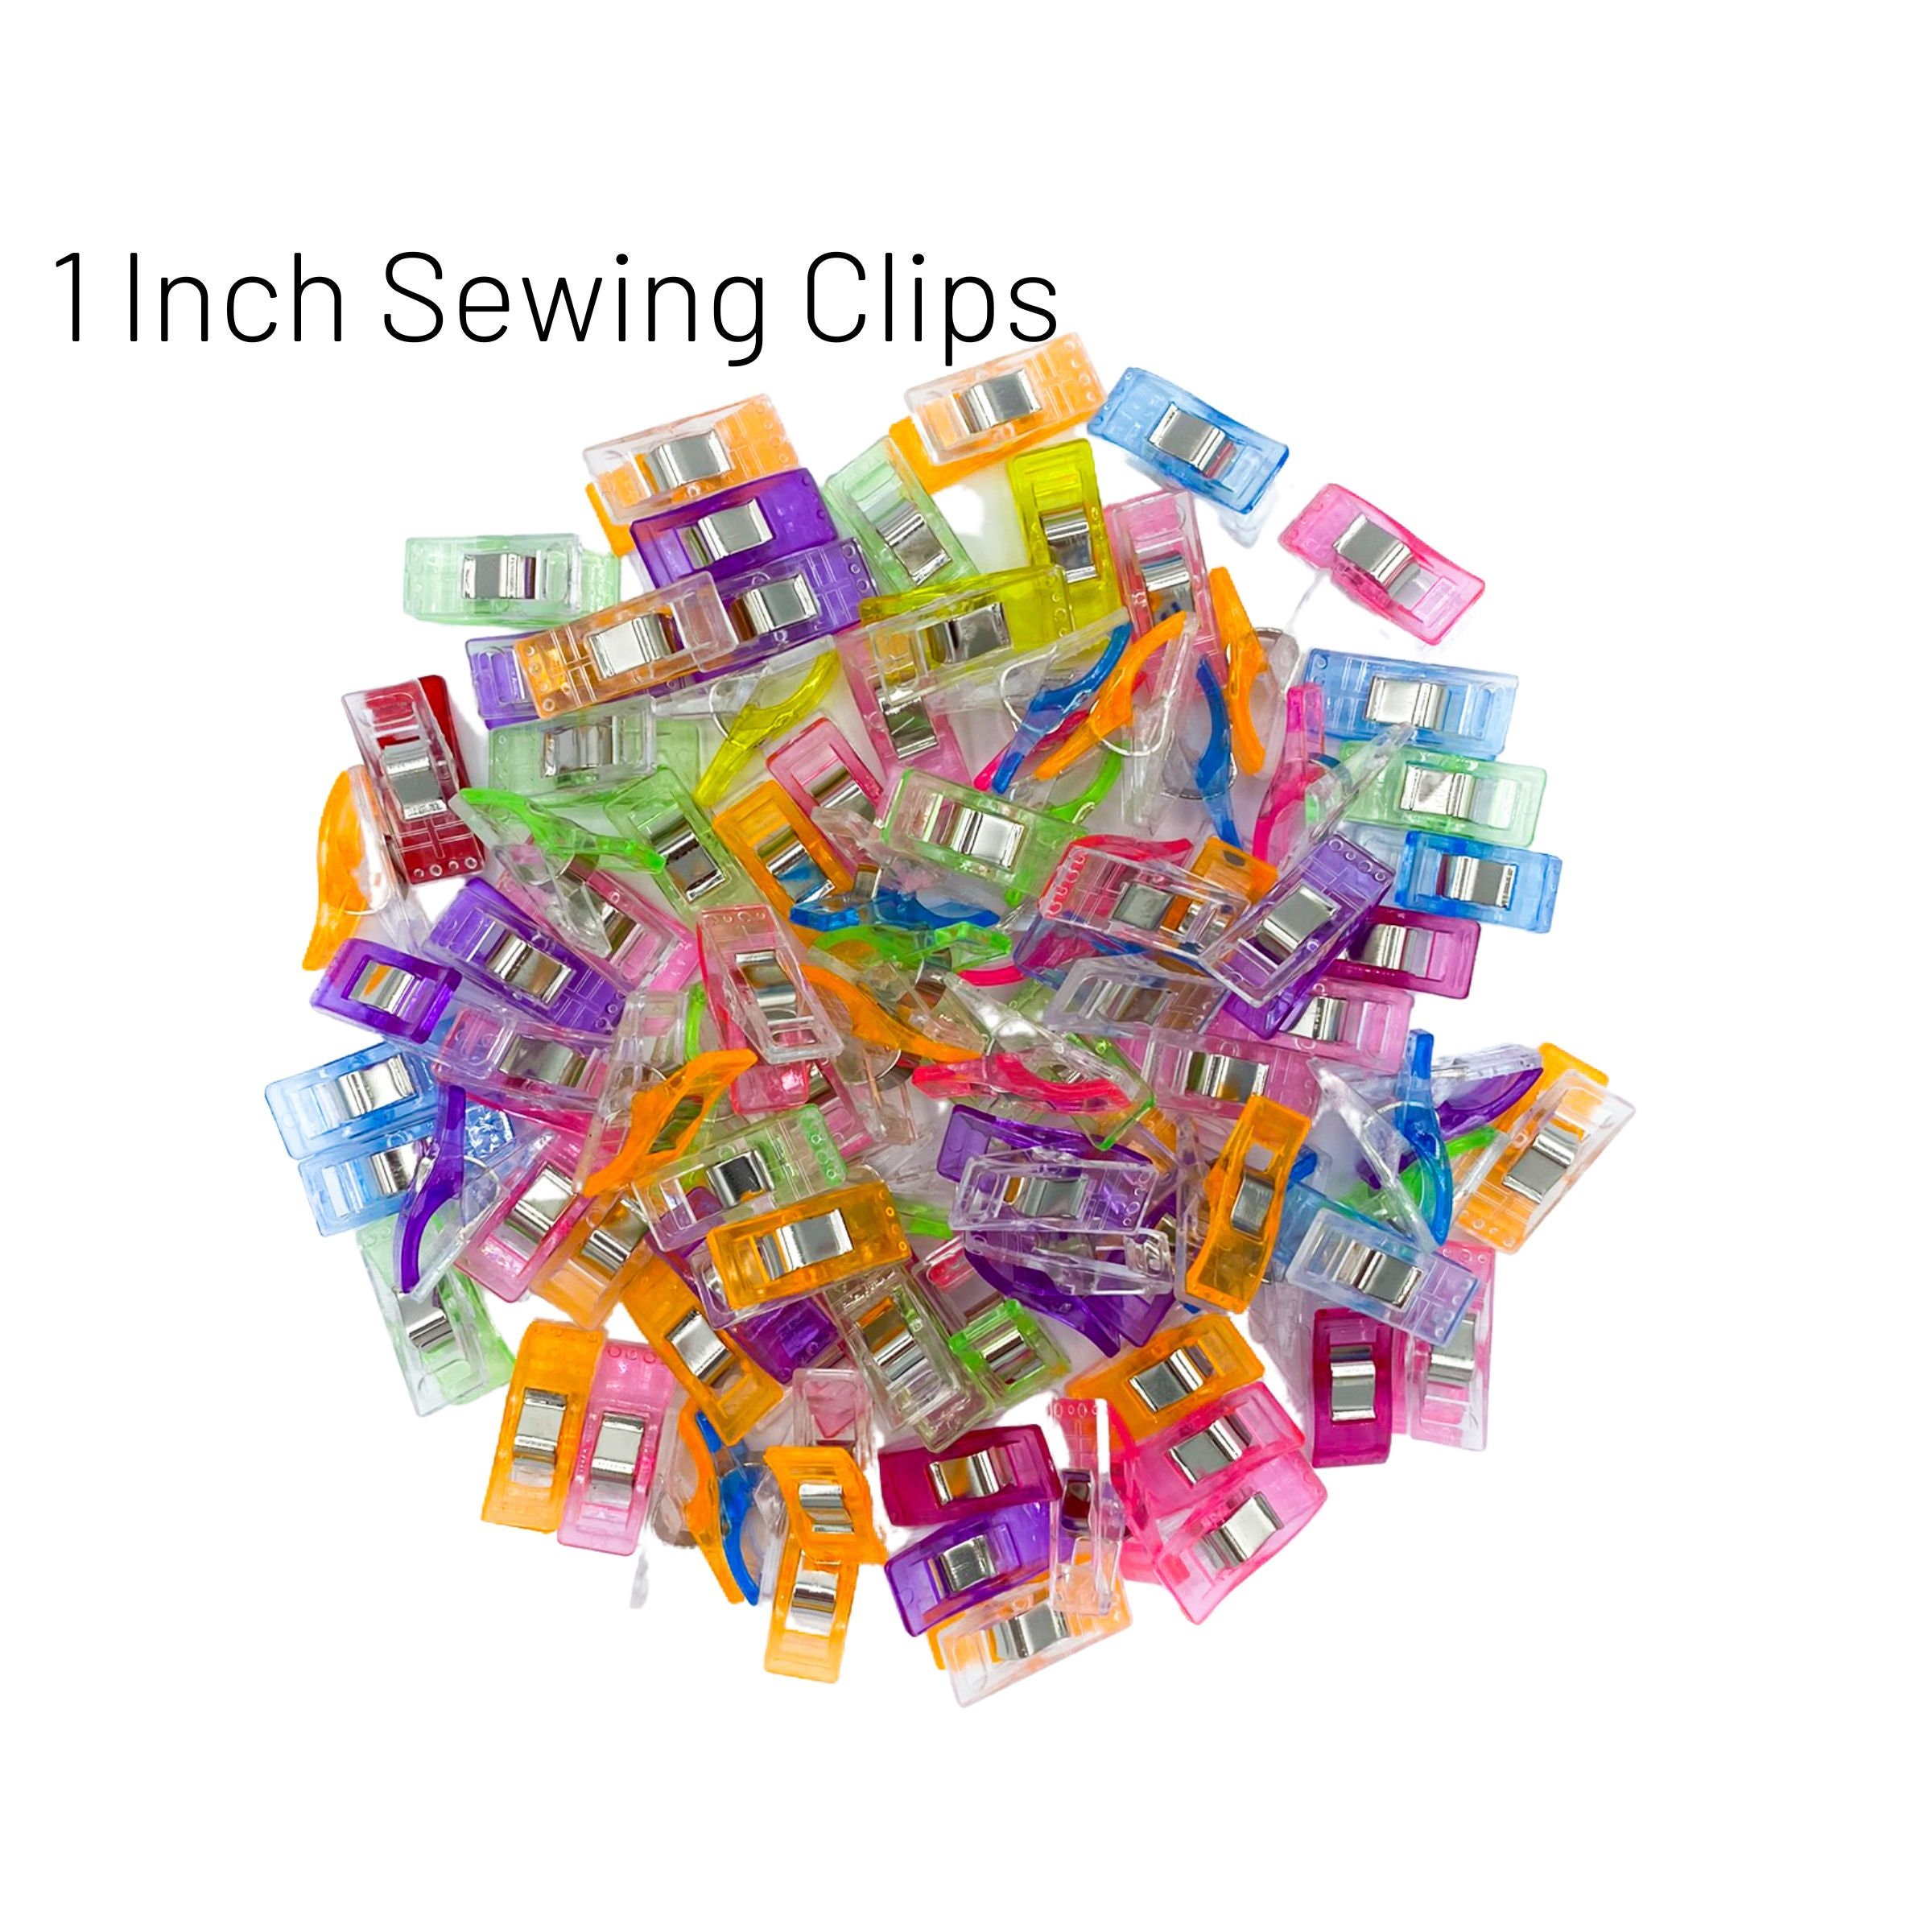 120 Pcs Multipurpose Sewing Clips for Fabric, Mini Clips for Sewing, Sewing Fasteners Clips, Multi-Color Crafting Tools for Fabric Sewing Binding